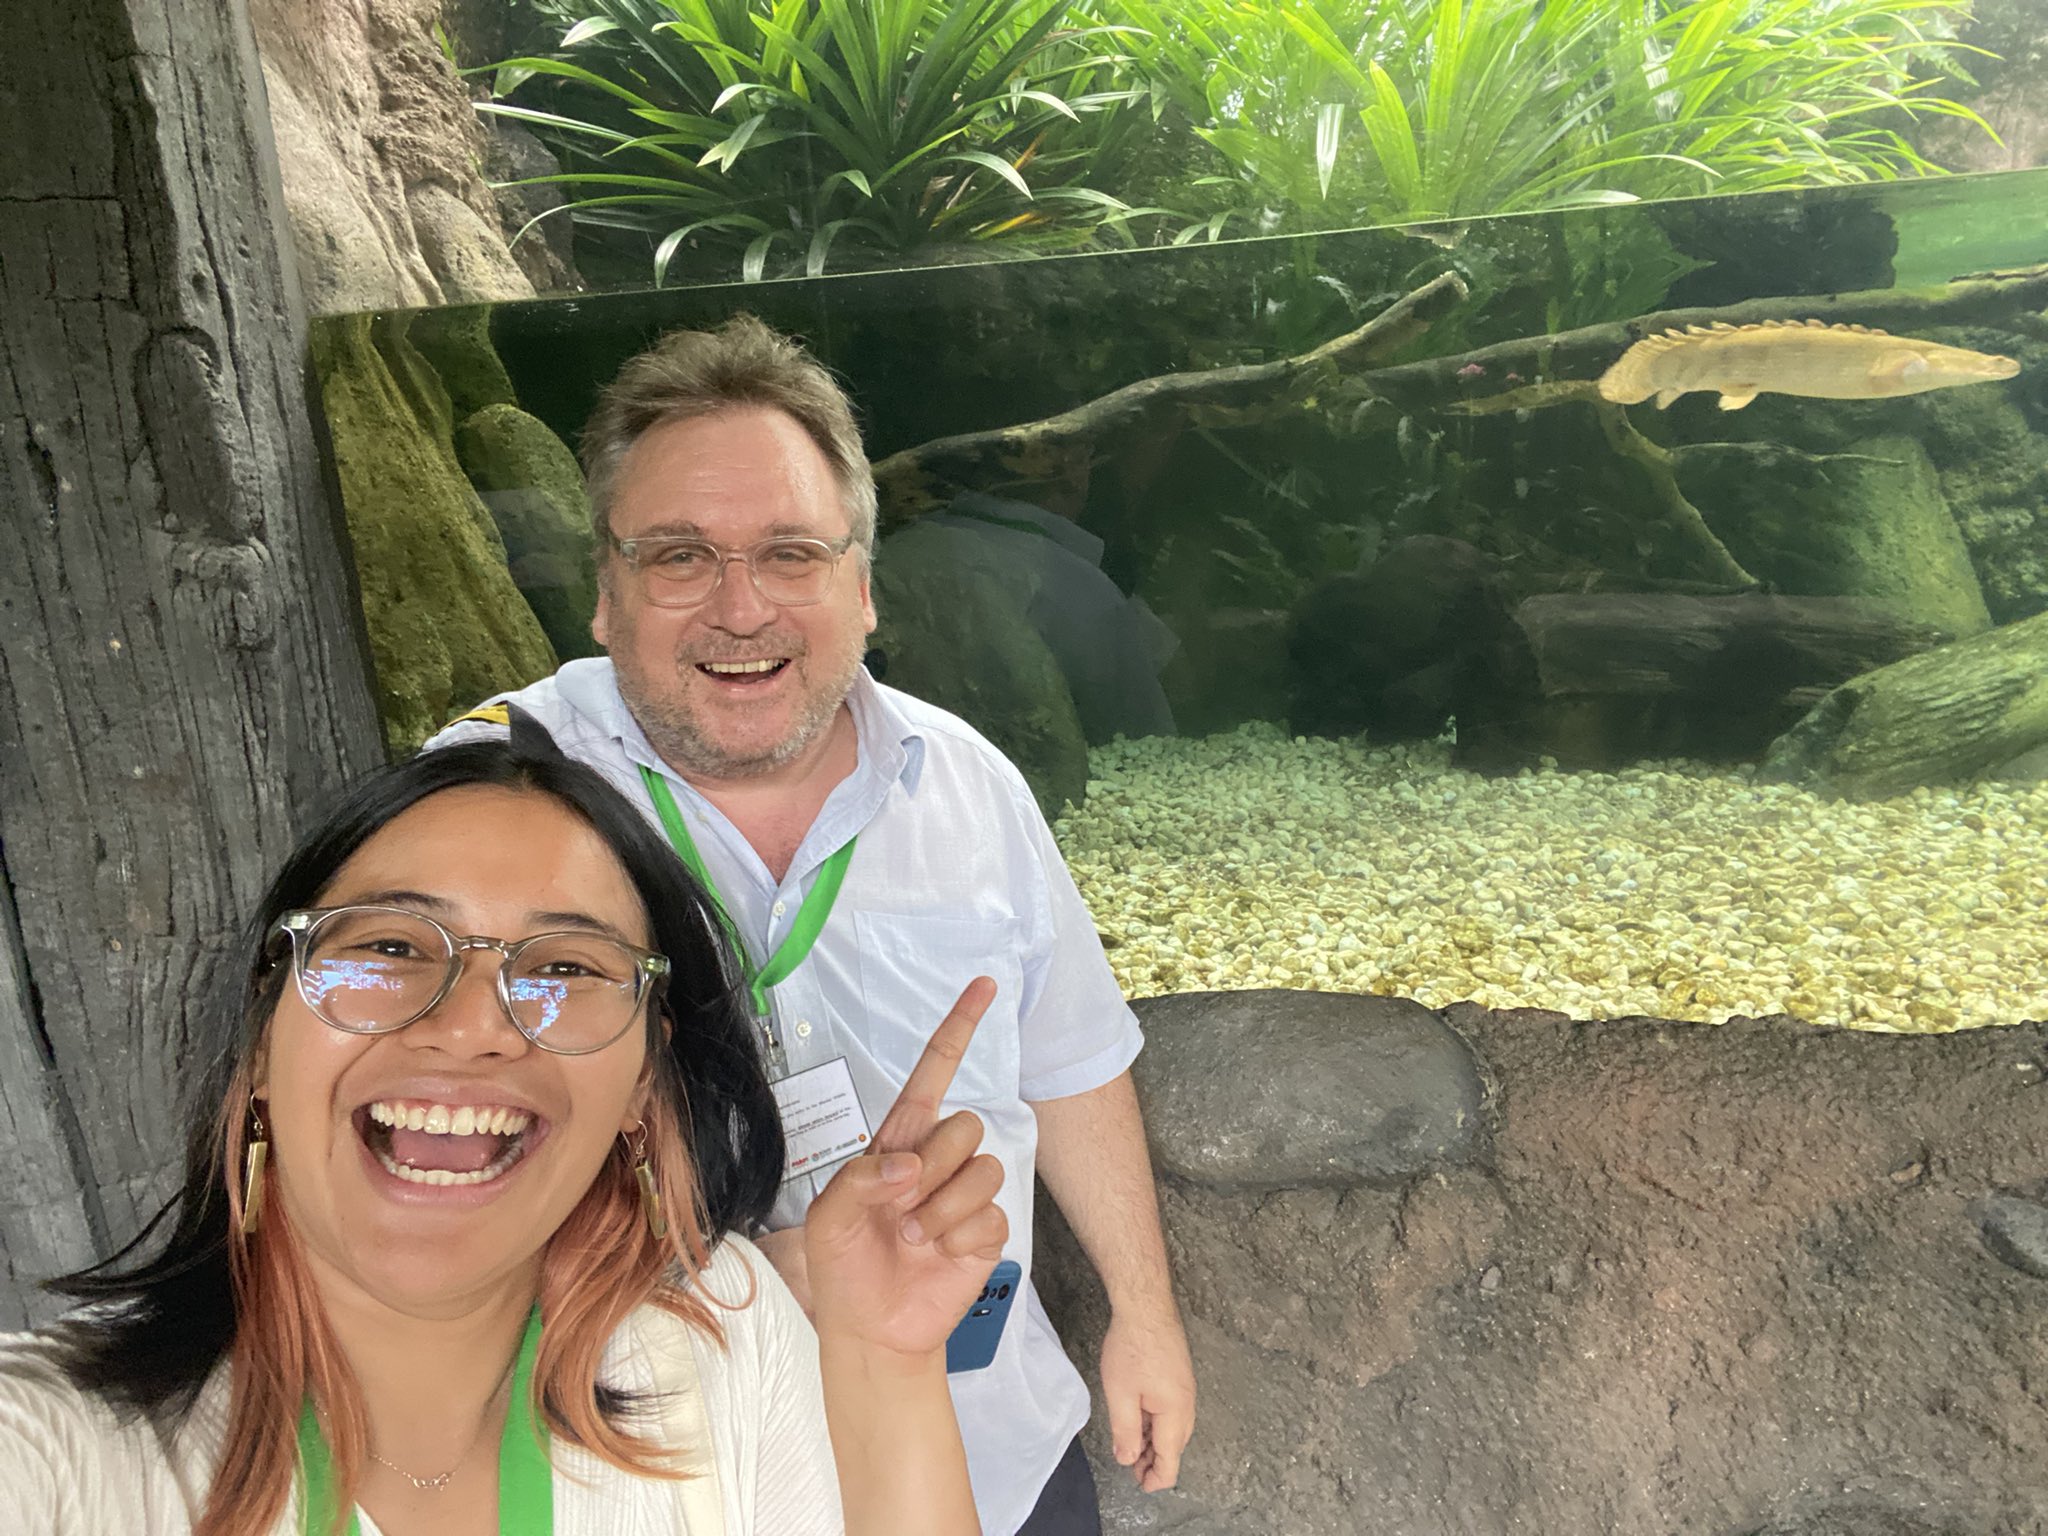 A photograph of a man and a woman in front of an aquarium. Conservation southeast asia.